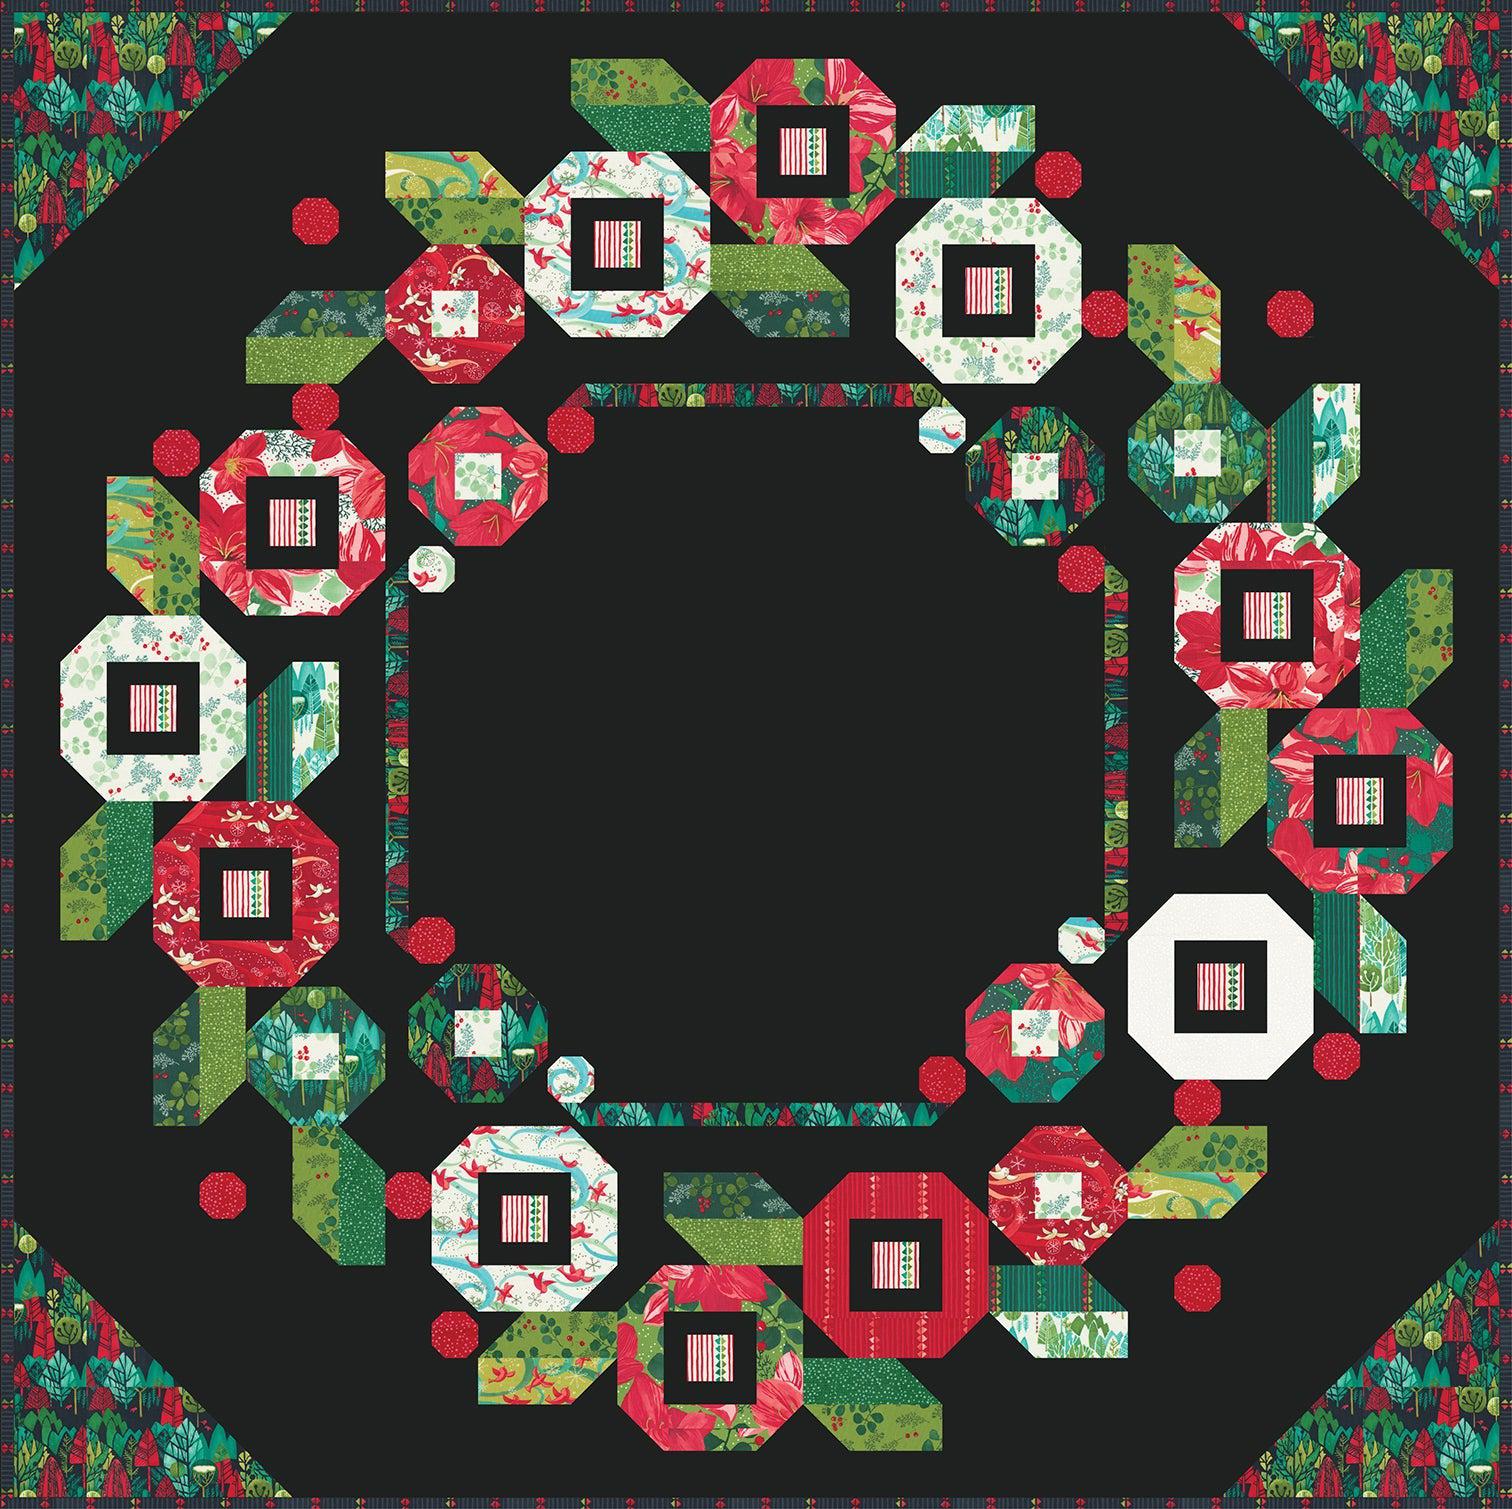 Winterly Black and Red Ring Around the Posies Quilt Kit